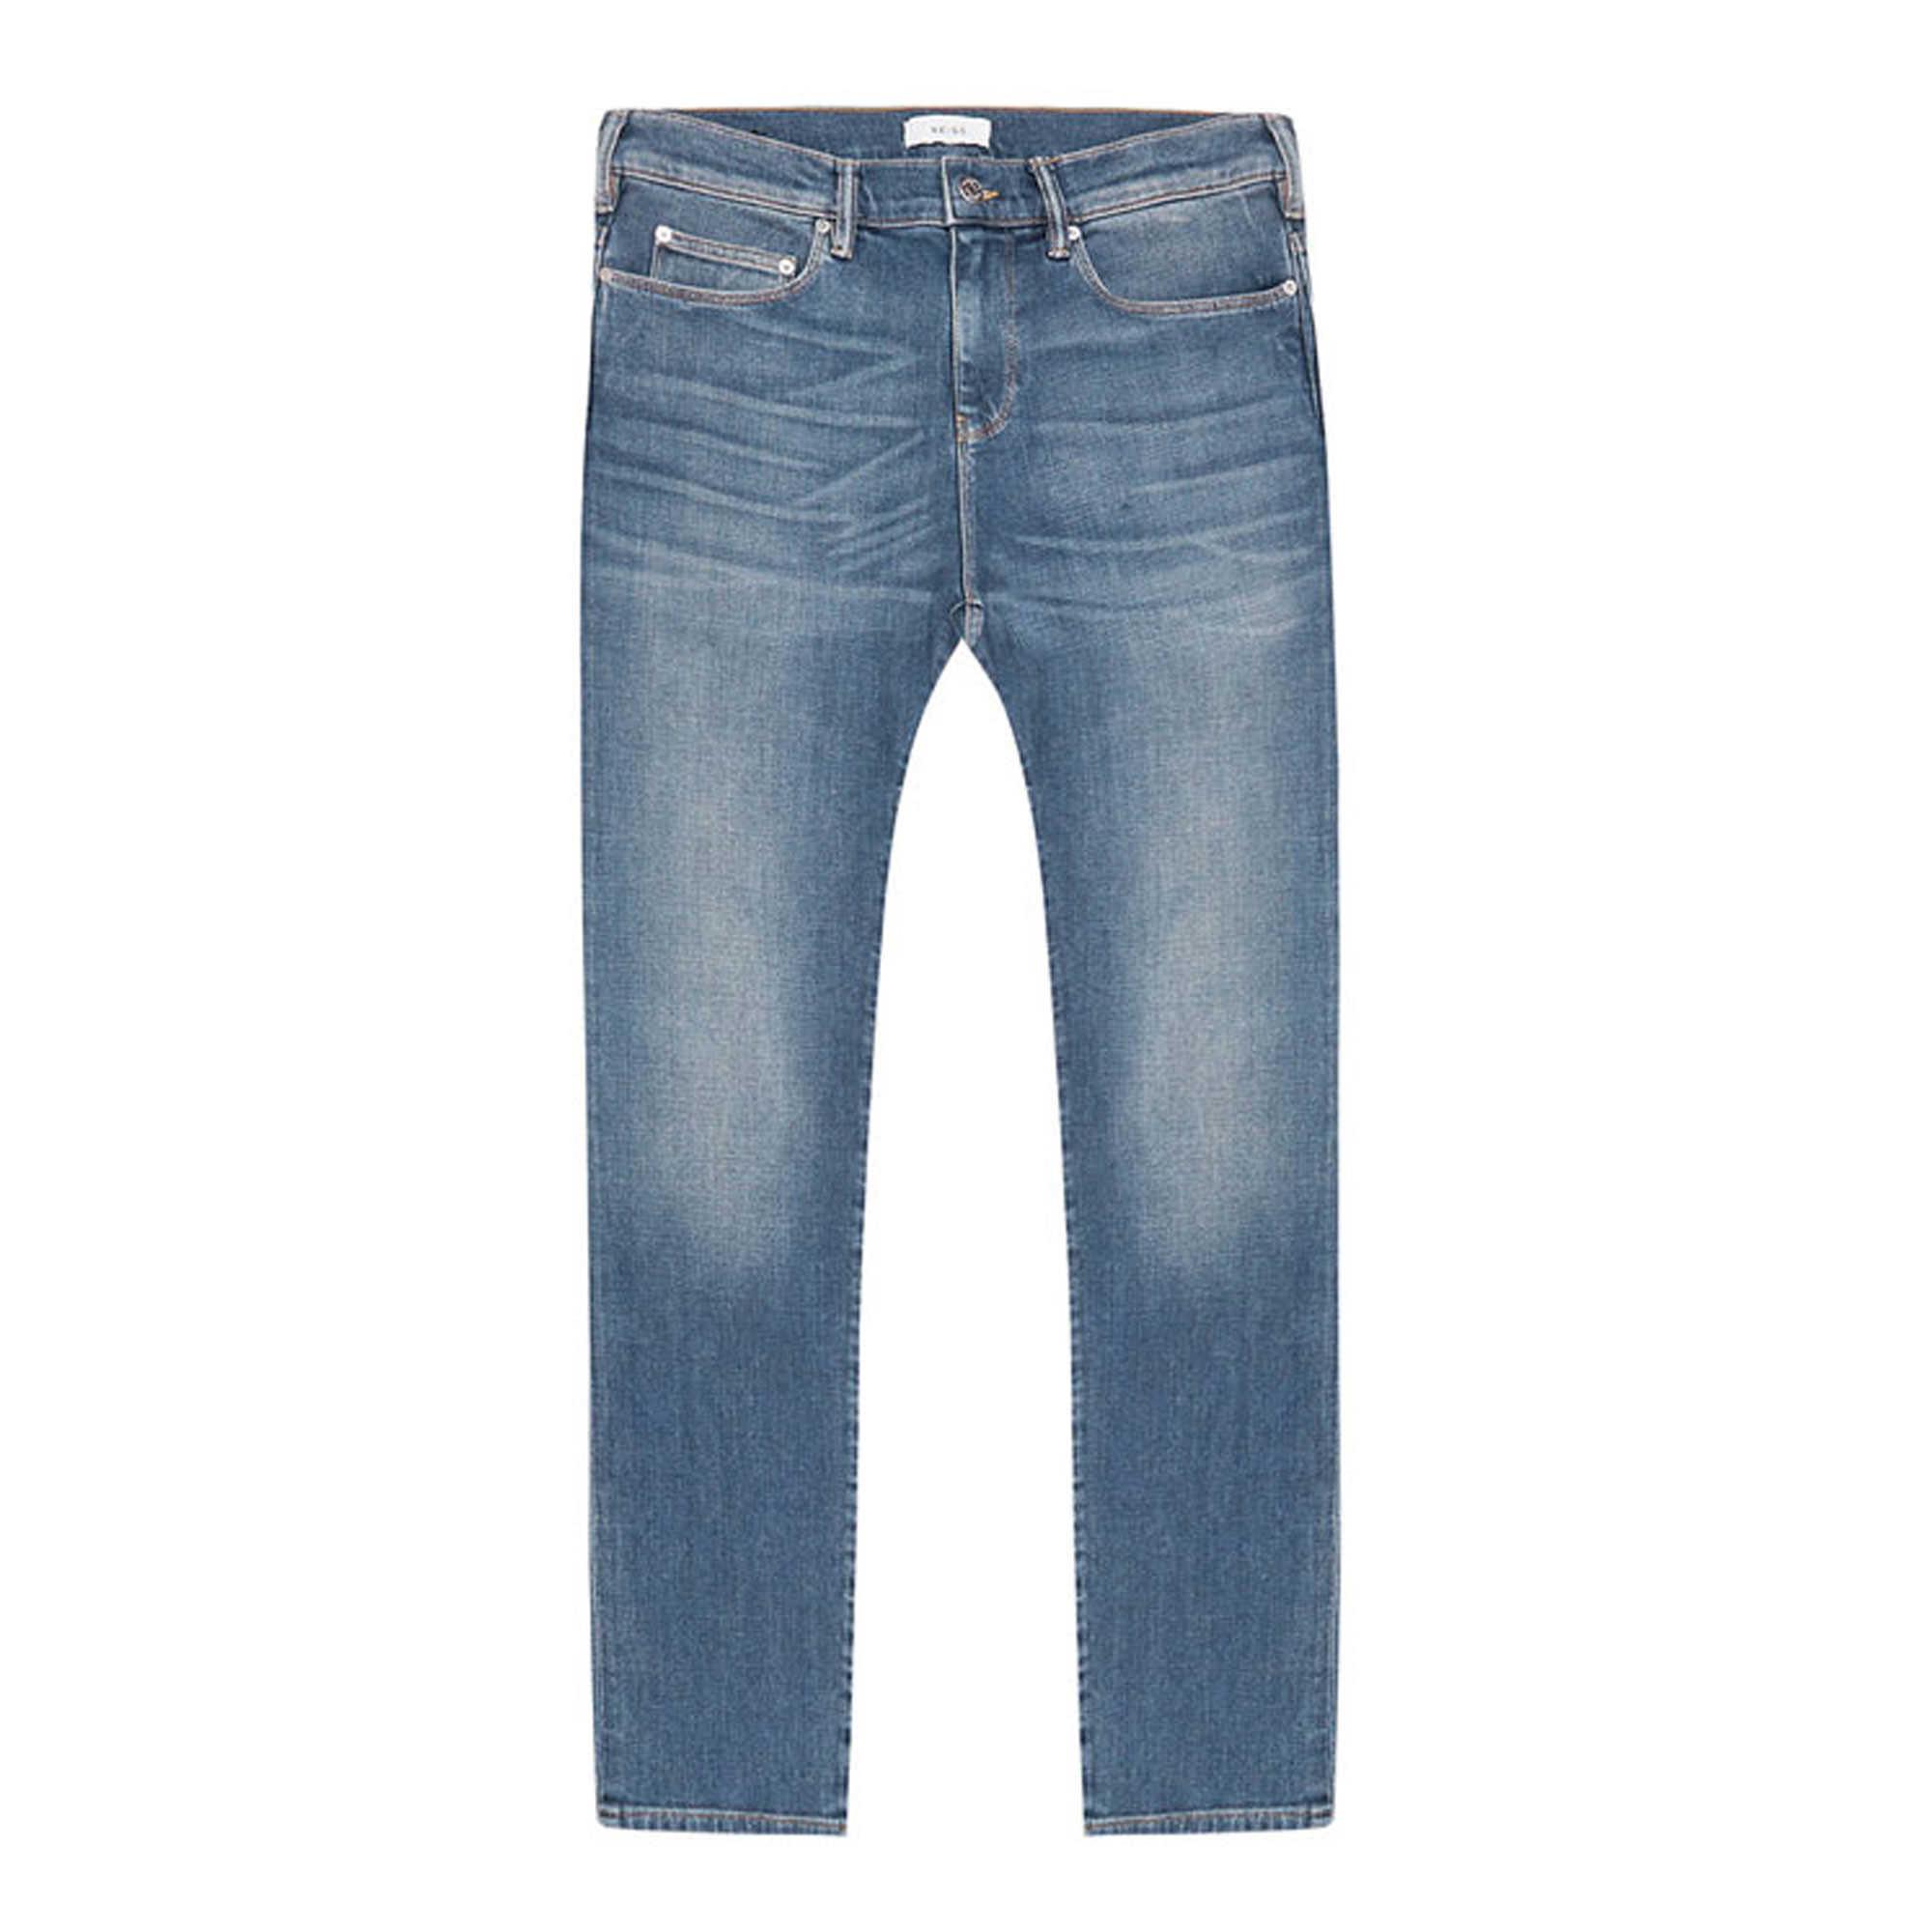 Ceha Tapered Slim-Fit Jeans